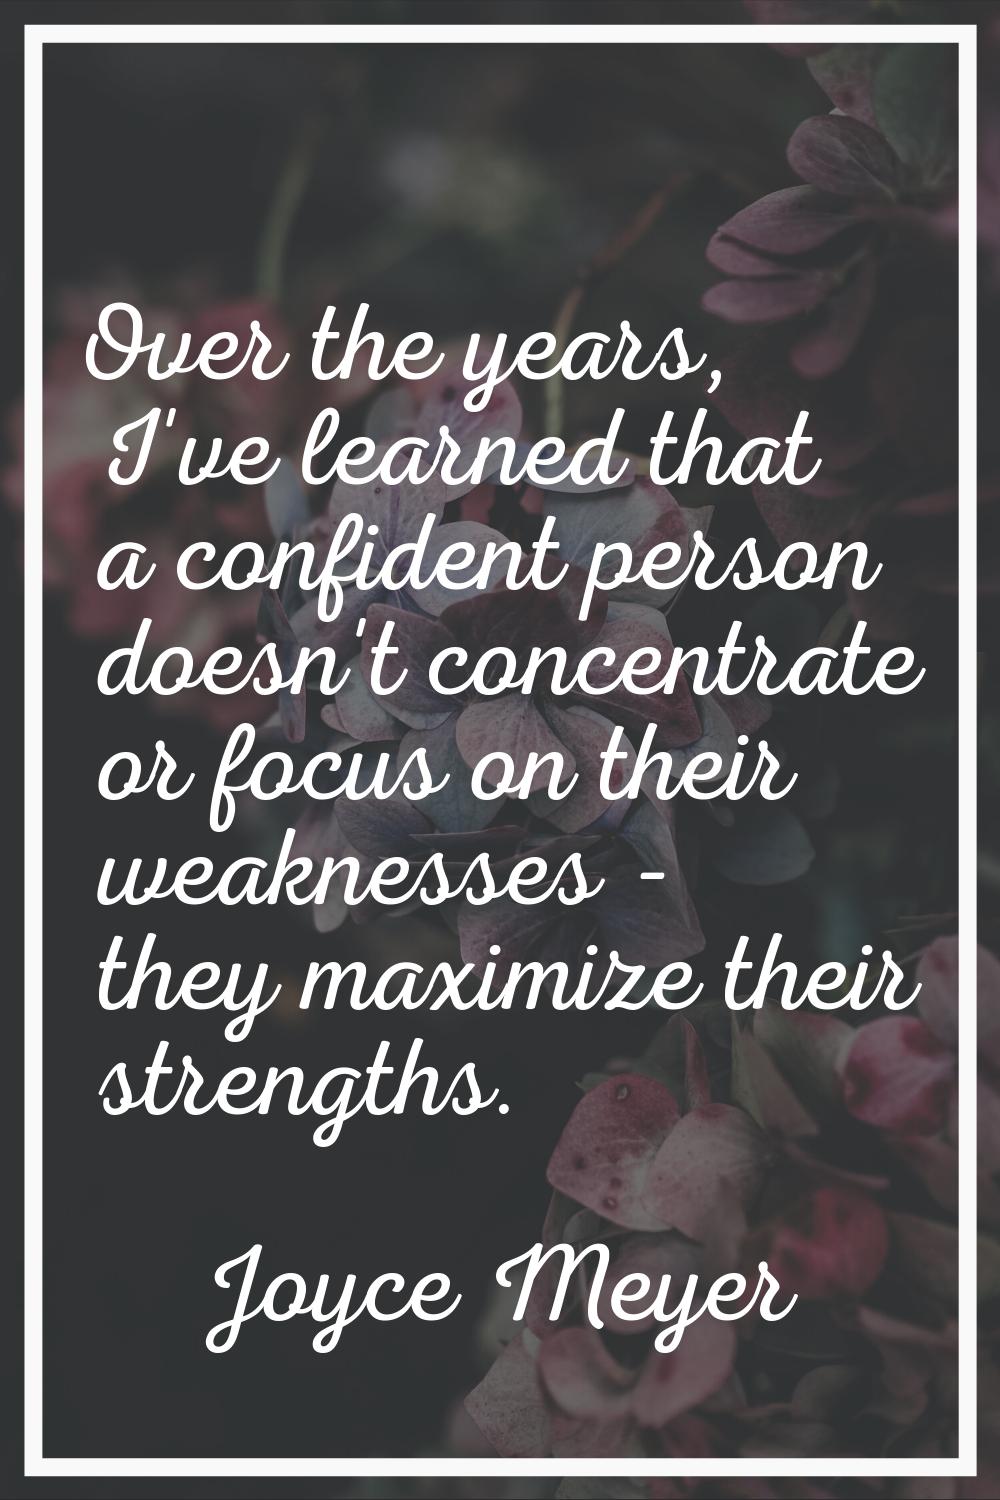 Over the years, I've learned that a confident person doesn't concentrate or focus on their weakness